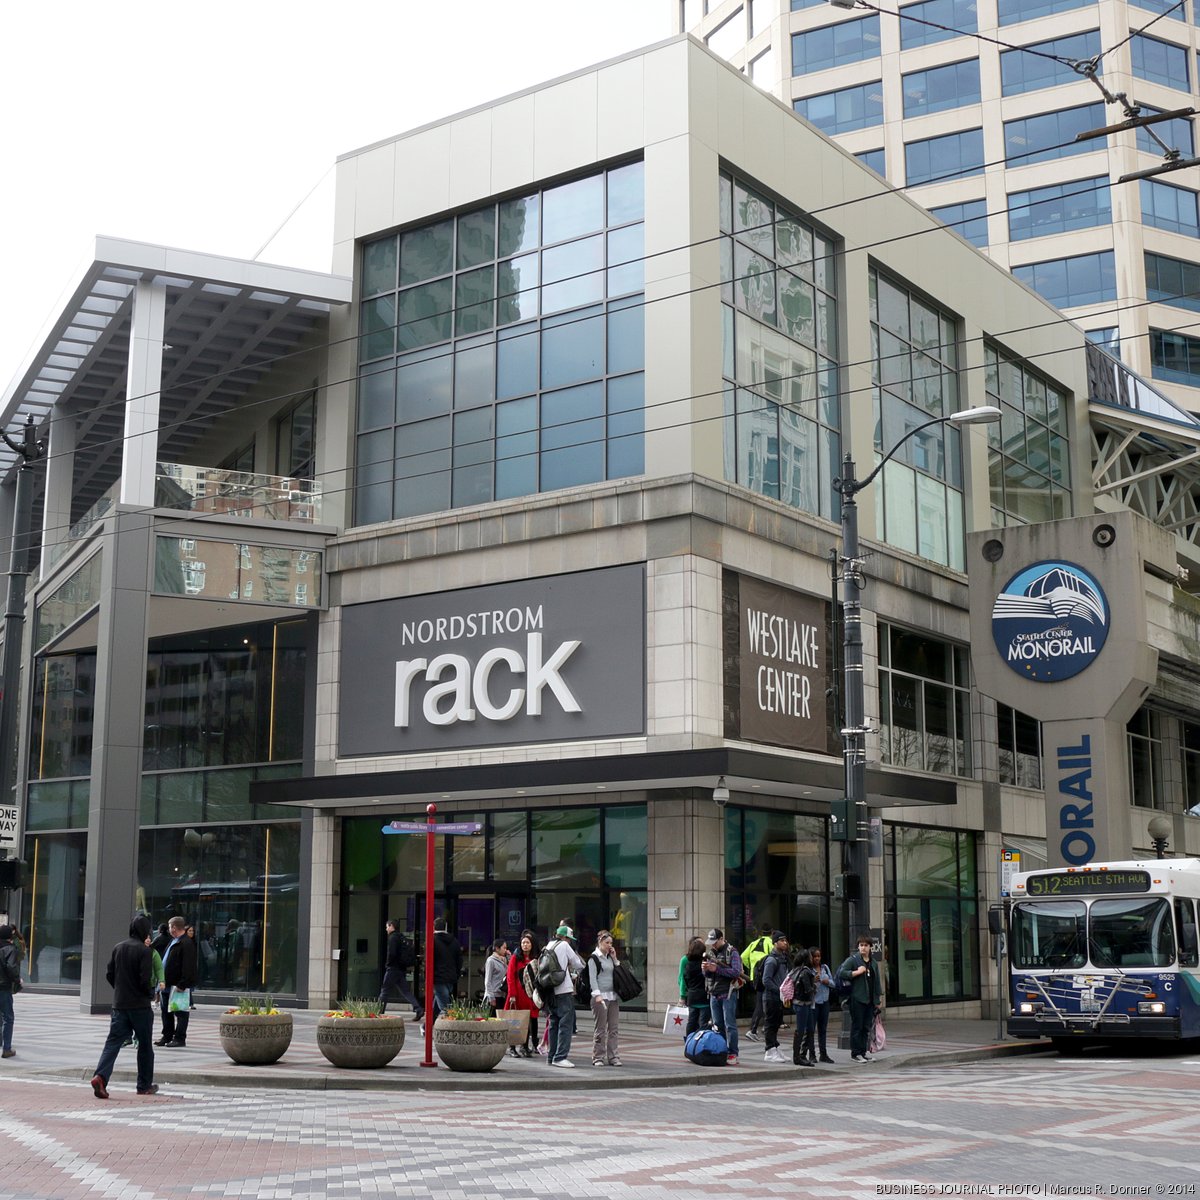 Clairemont Town Square Welcomes Nordstrom Rack's Newest San Diego